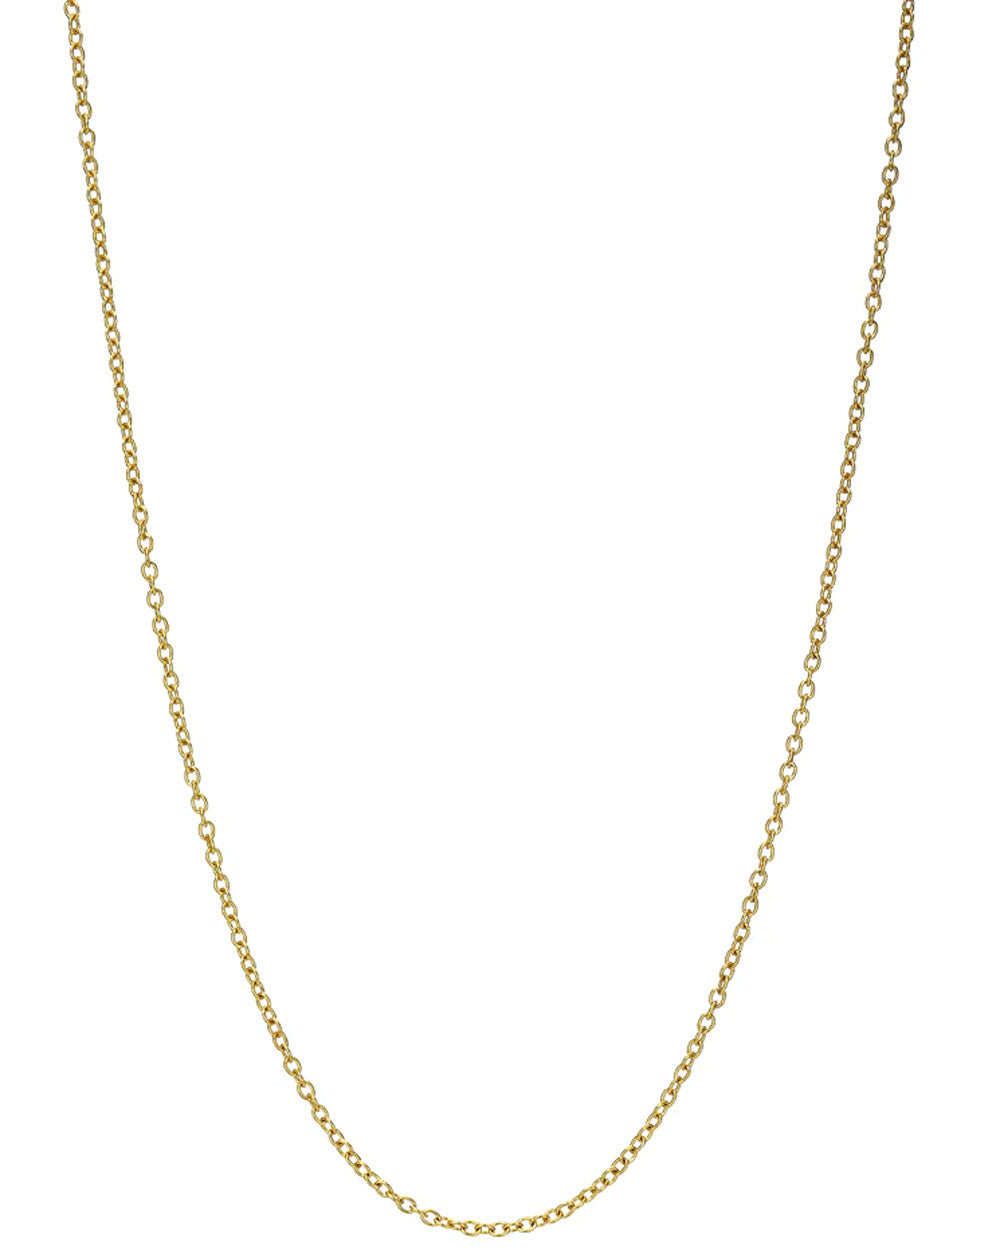 14k Yellow Gold Small Rolo Chain Necklace